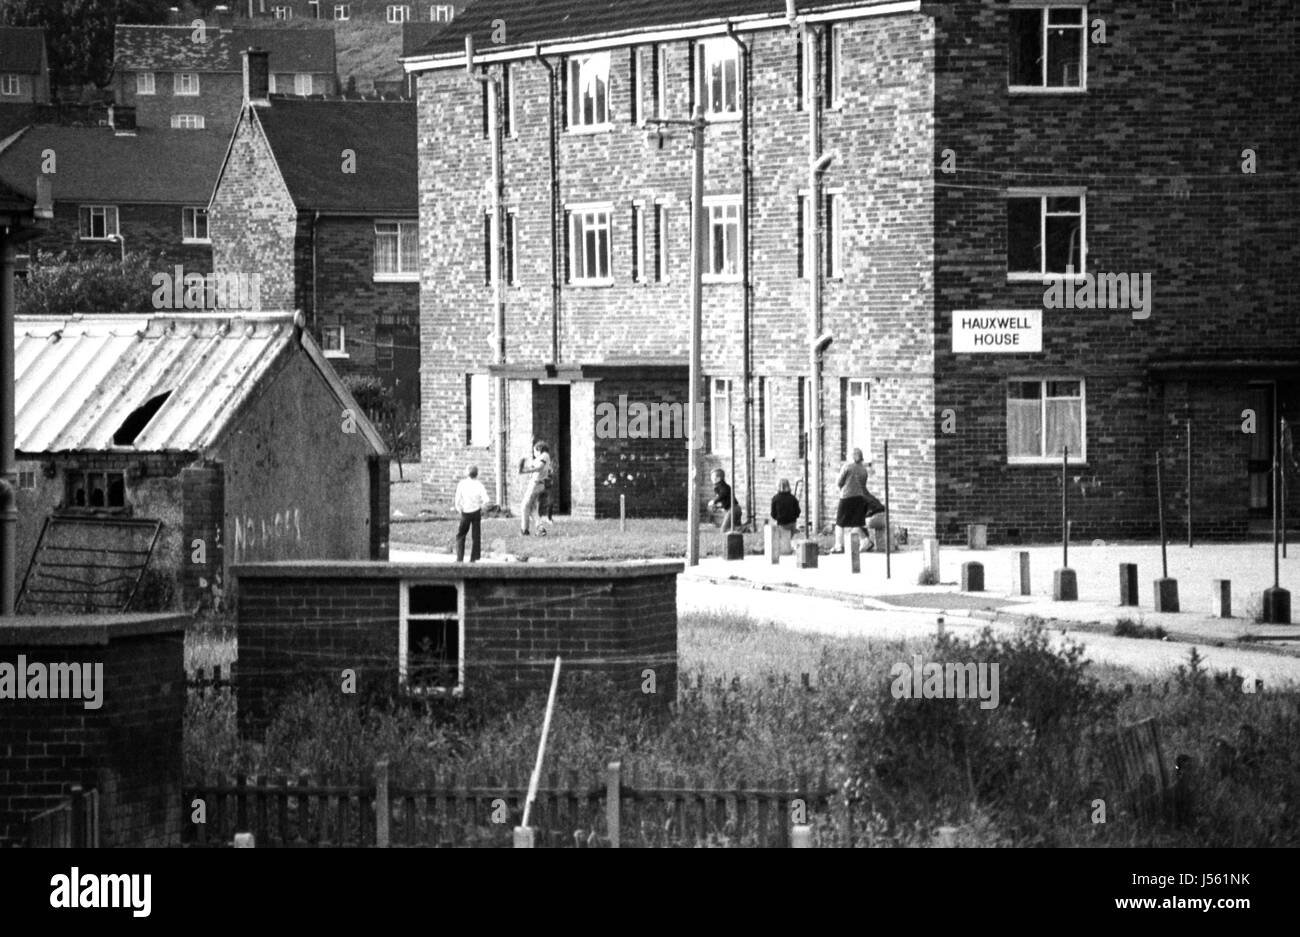 The Boulevard, Buttershaw Estate, Bradford, West Yorkshire a sprawling local authority 1950's council housing scheme. 1982. Black and white images from 1982 portray the gritty surroundings of a typical northern England working class sink estate. Stock Photo